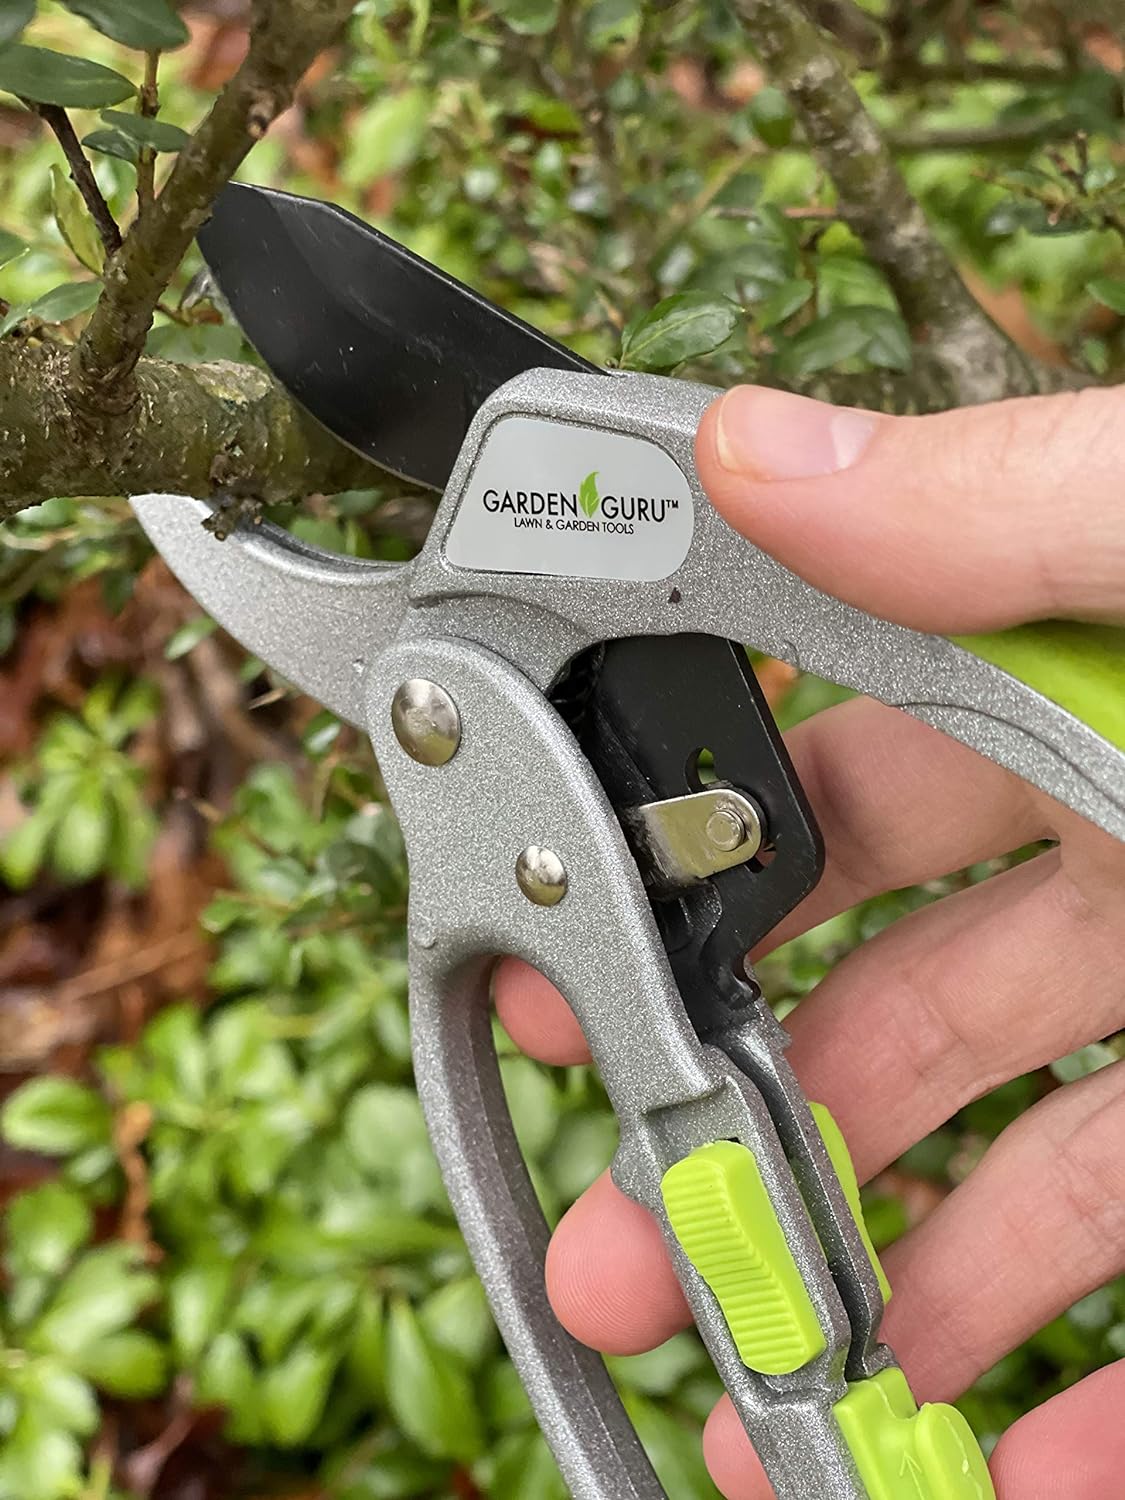 Easy Action Ratchet Pruning Shears - Cate's Garden